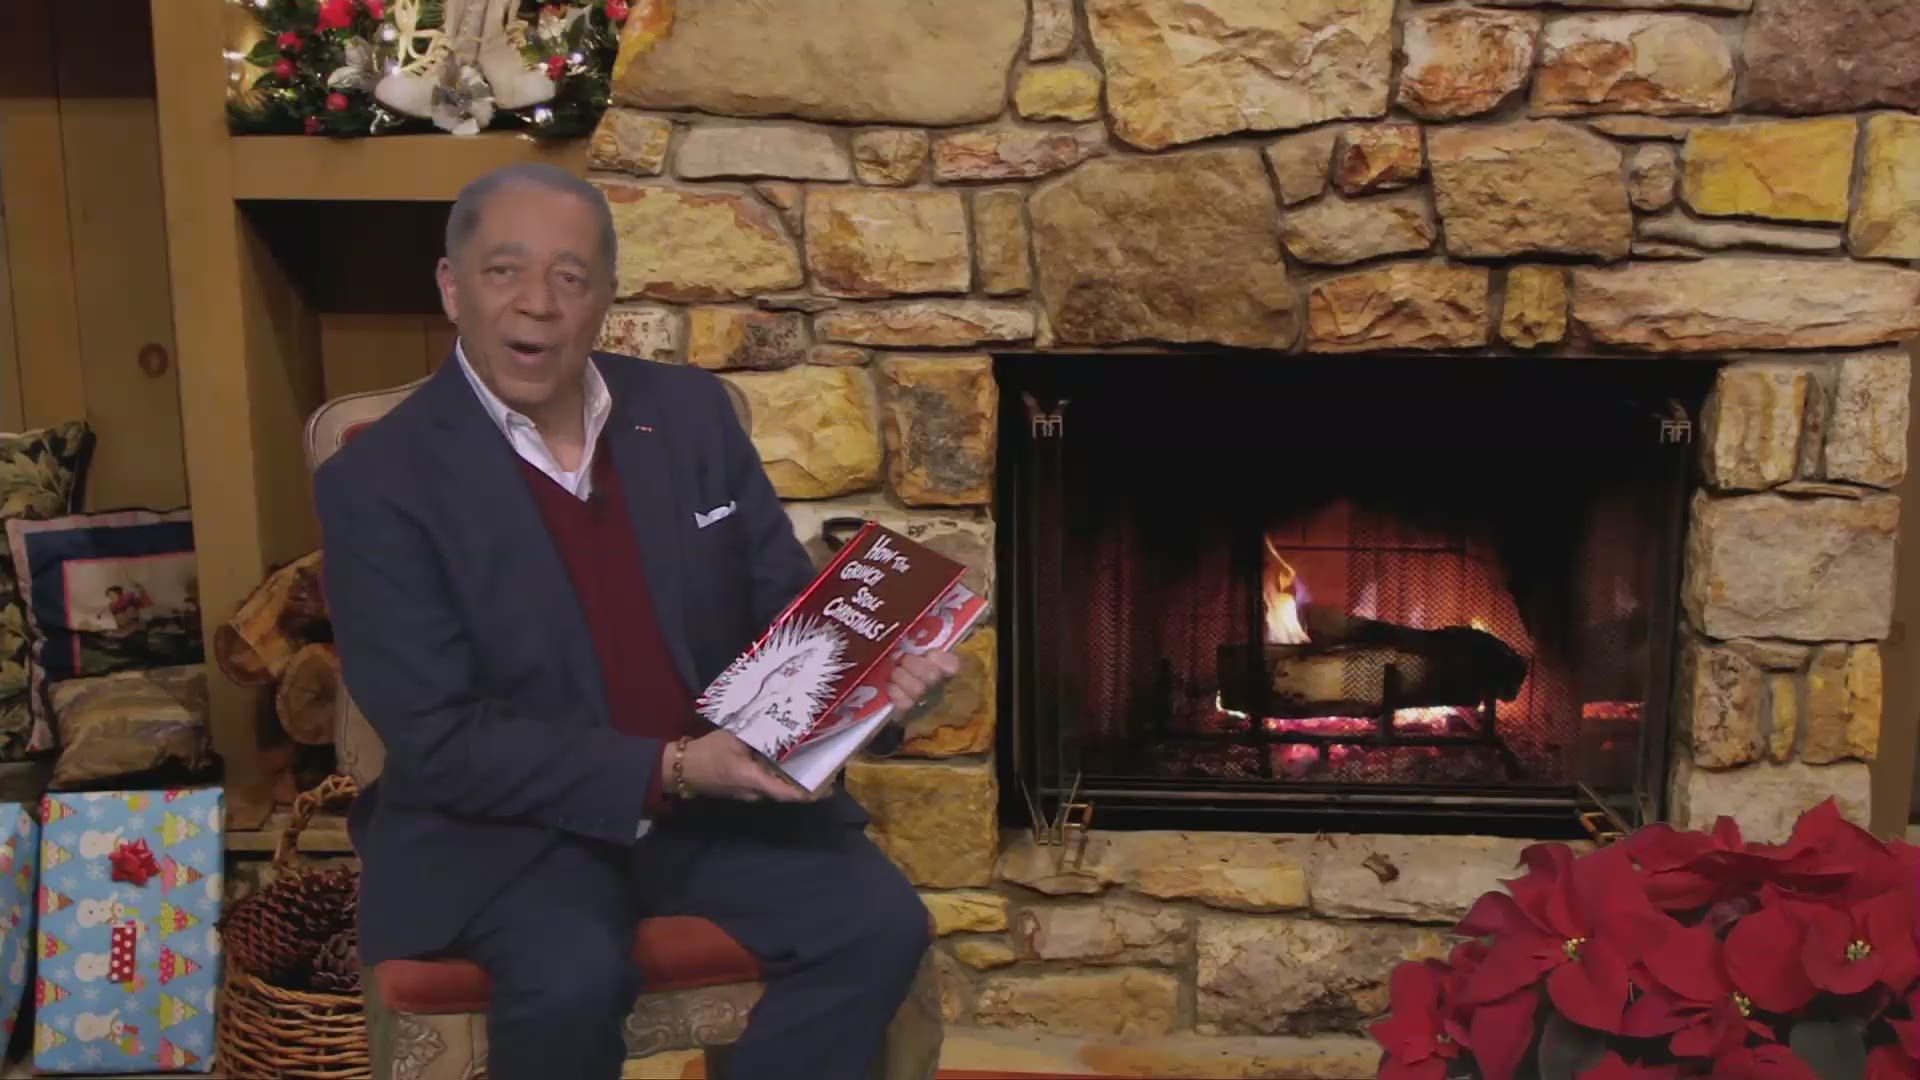 "How the Grinch Stole Christmas!" was written by Dr. Seuss in 1957.  3News anchor Leon Bibb reads the book to the audience in front of a cozy fire.